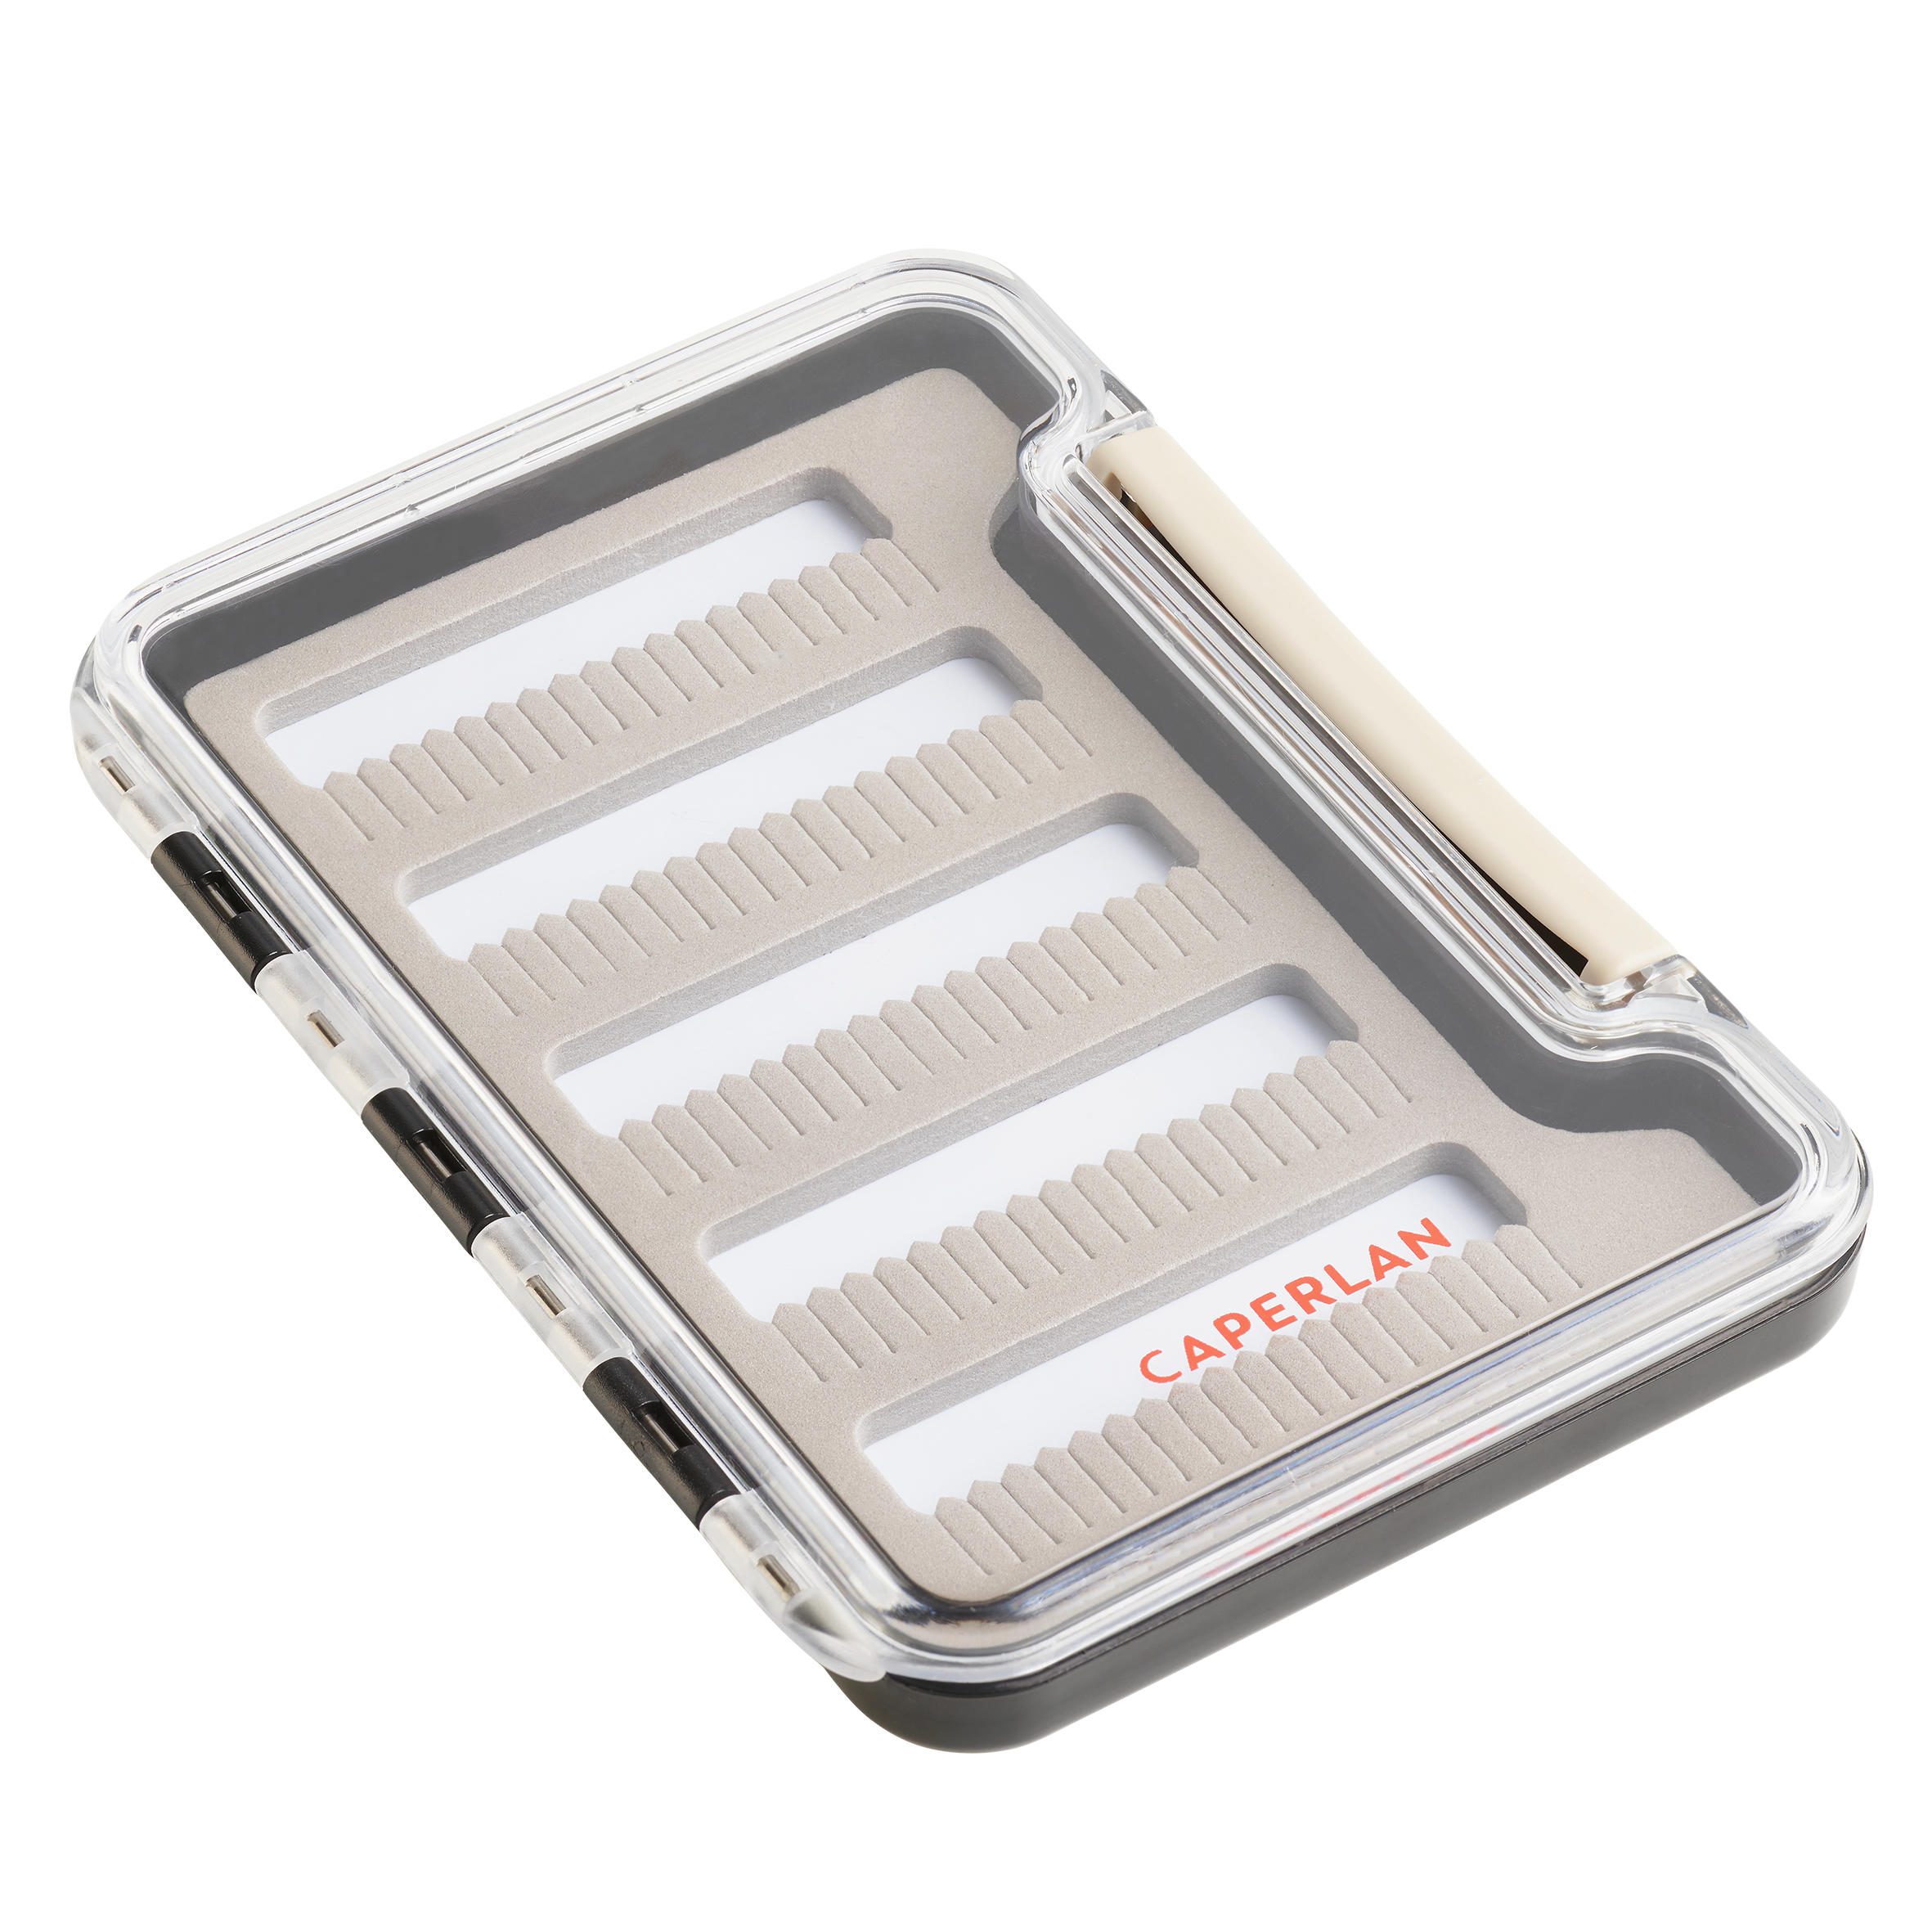 FLY FISHING FLY BOX S CAPERLAN